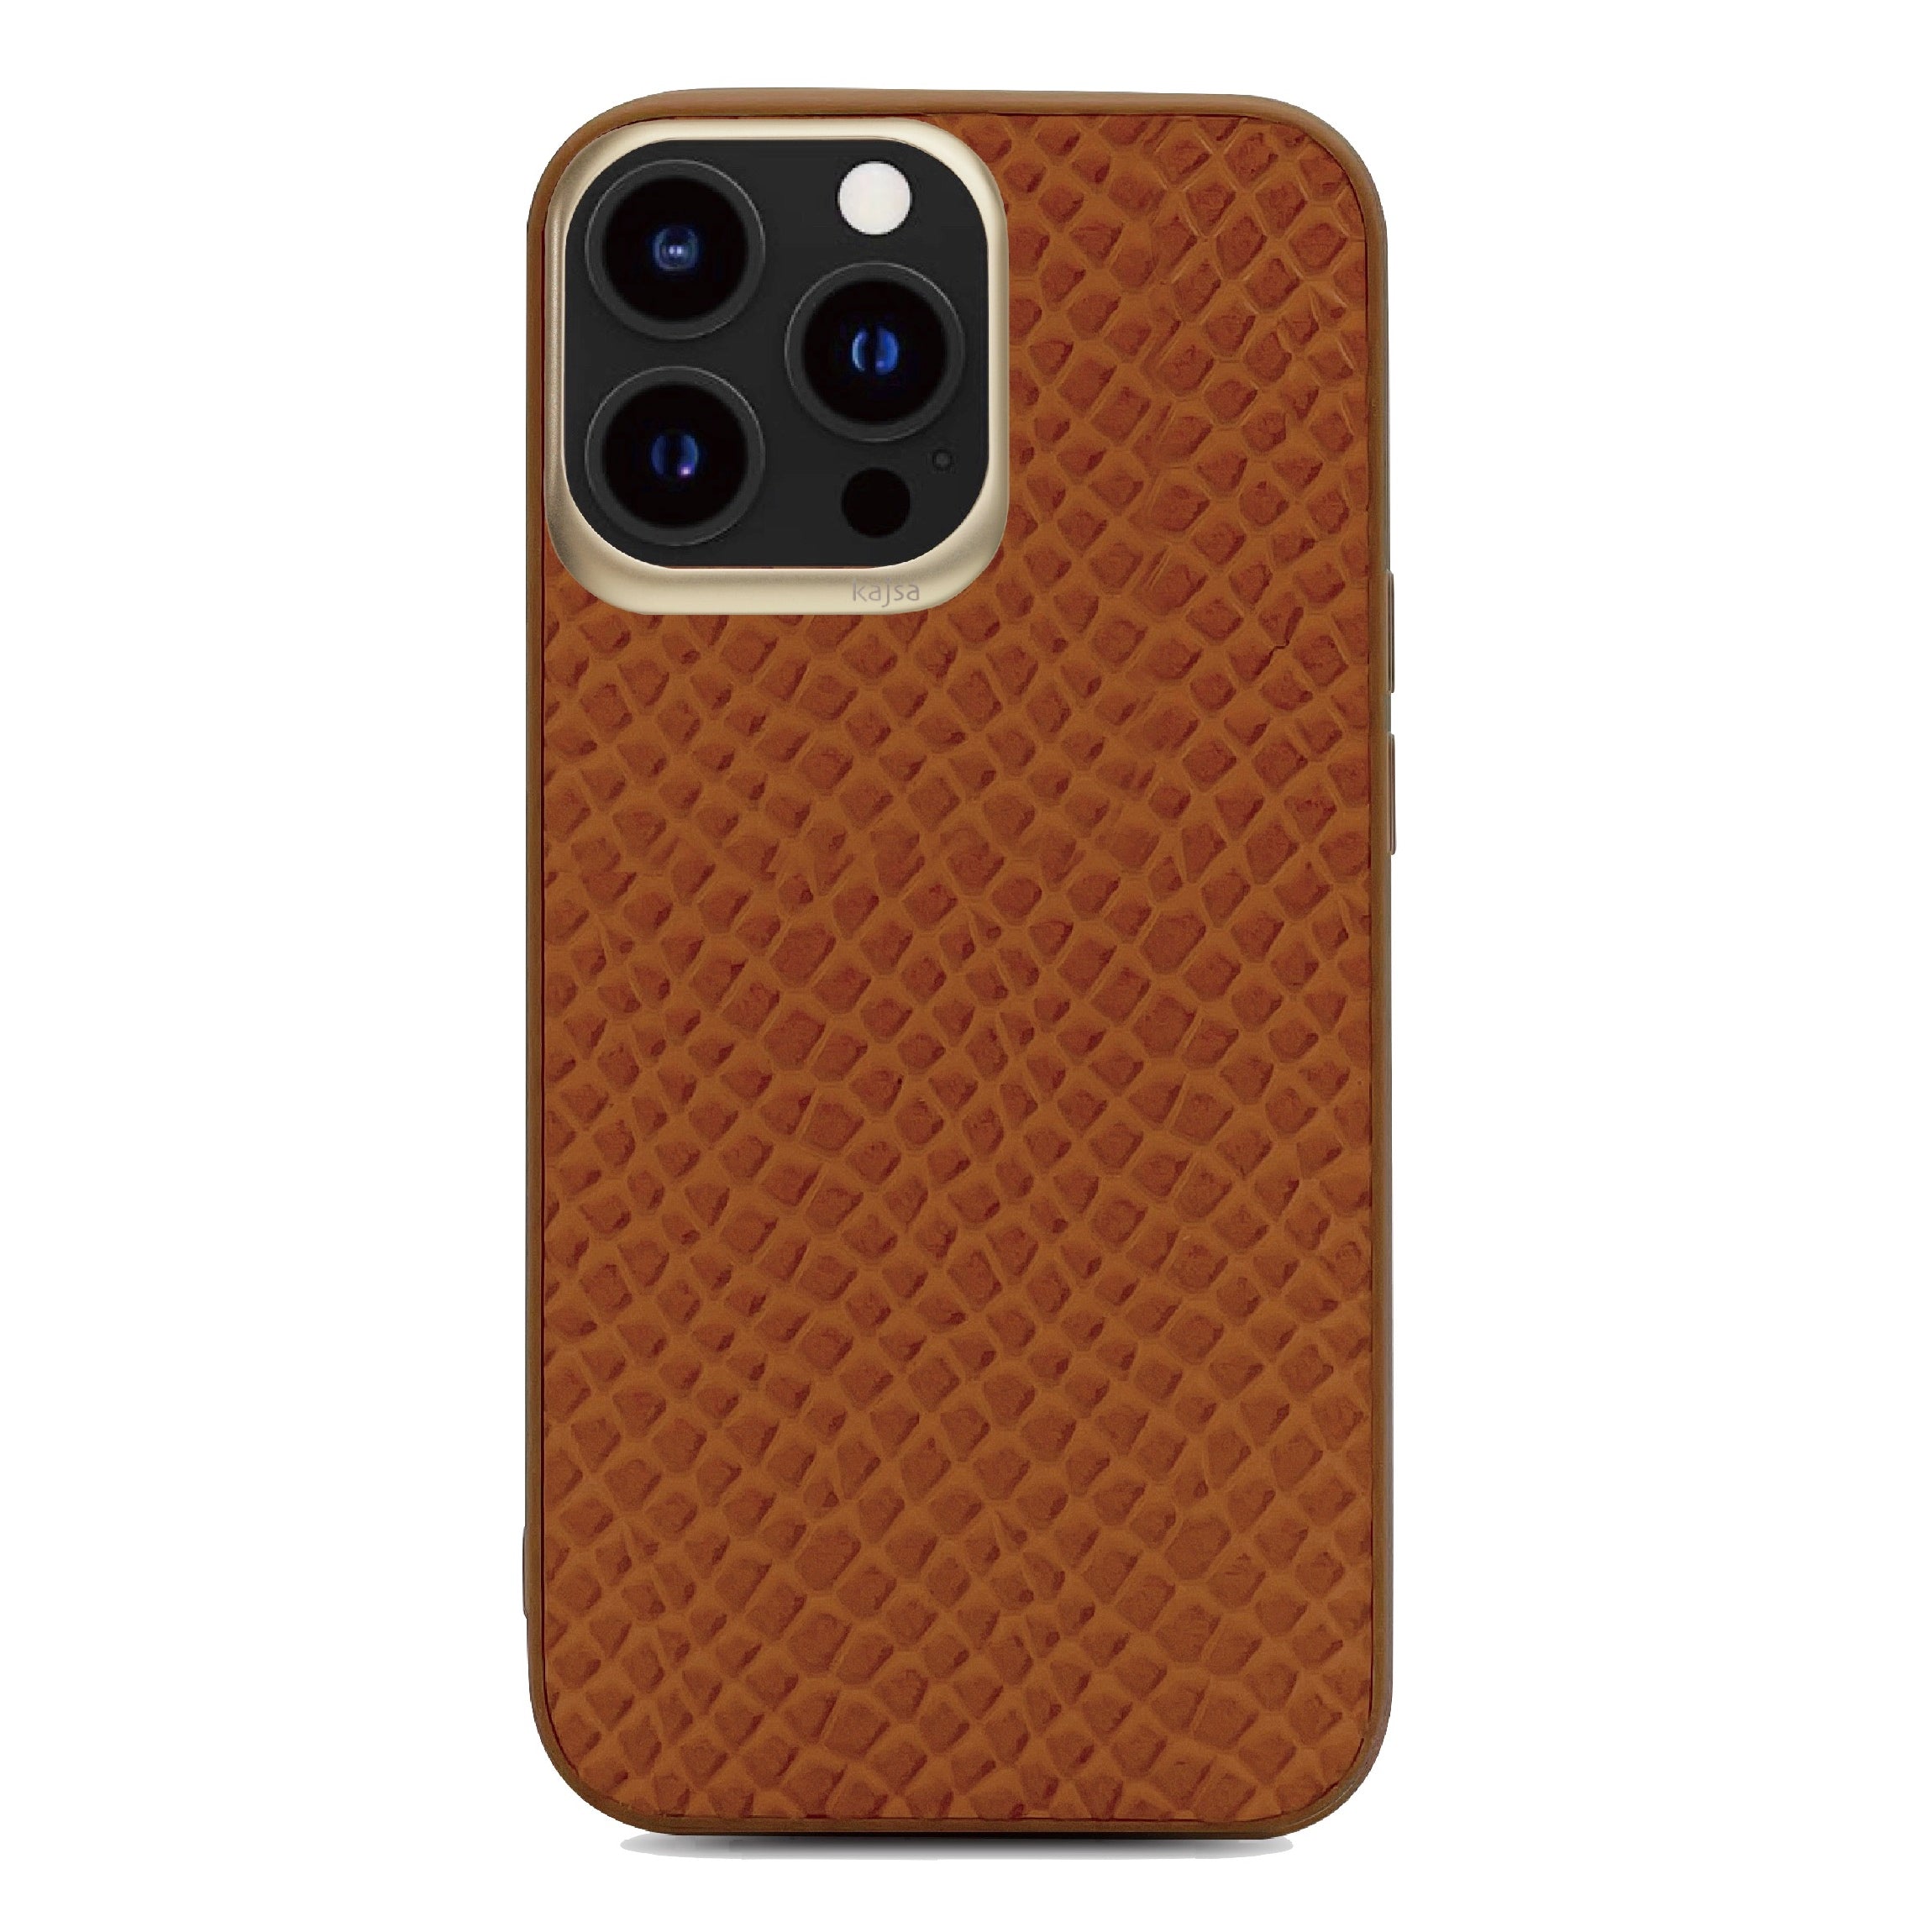 Genuine Leather Pearl Pattern Back Case for iPhone 13-Phone Case- phone case - phone cases- phone cover- iphone cover- iphone case- iphone cases- leather case- leather cases- DIYCASE - custom case - leather cover - hand strap case - croco pattern case - snake pattern case - carbon fiber phone case - phone case brand - unique phone case - high quality - phone case brand - protective case - buy phone case hong kong - online buy phone case - iphone‎手機殼 - 客製化手機殼 - samsung ‎手機殼 - 香港手機殼 - 買電話殼